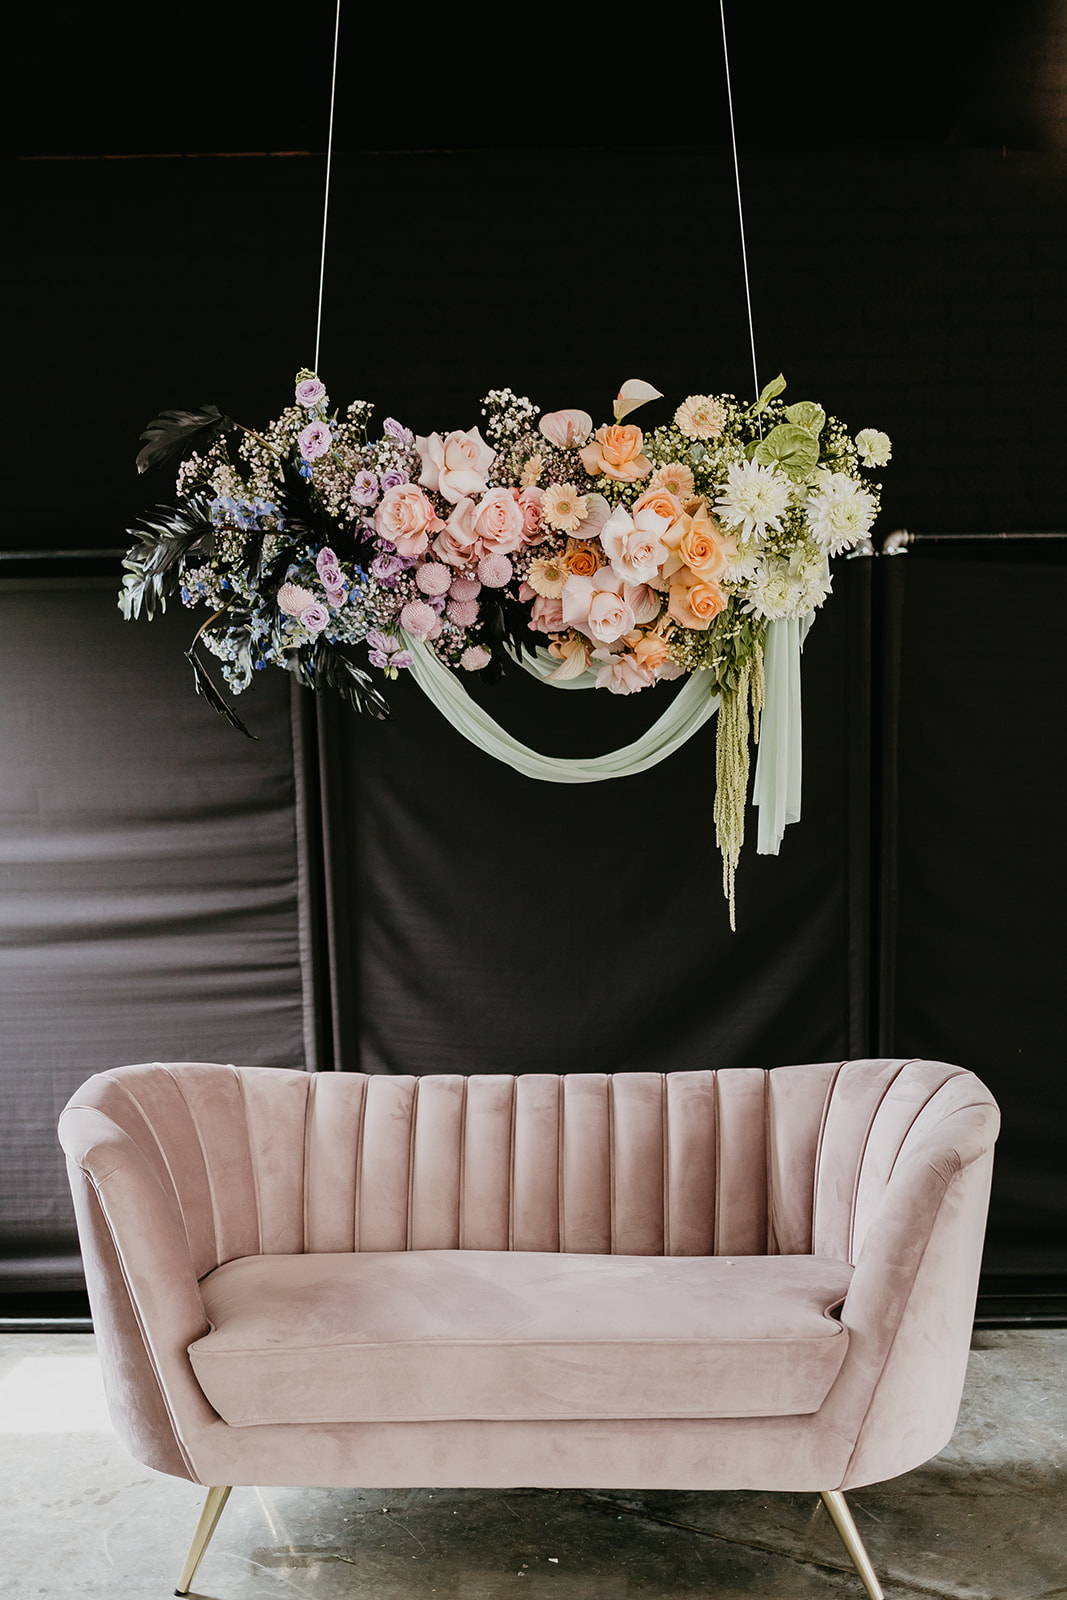 Pink loveseat underneath a colourful floral installation with a black backdrop